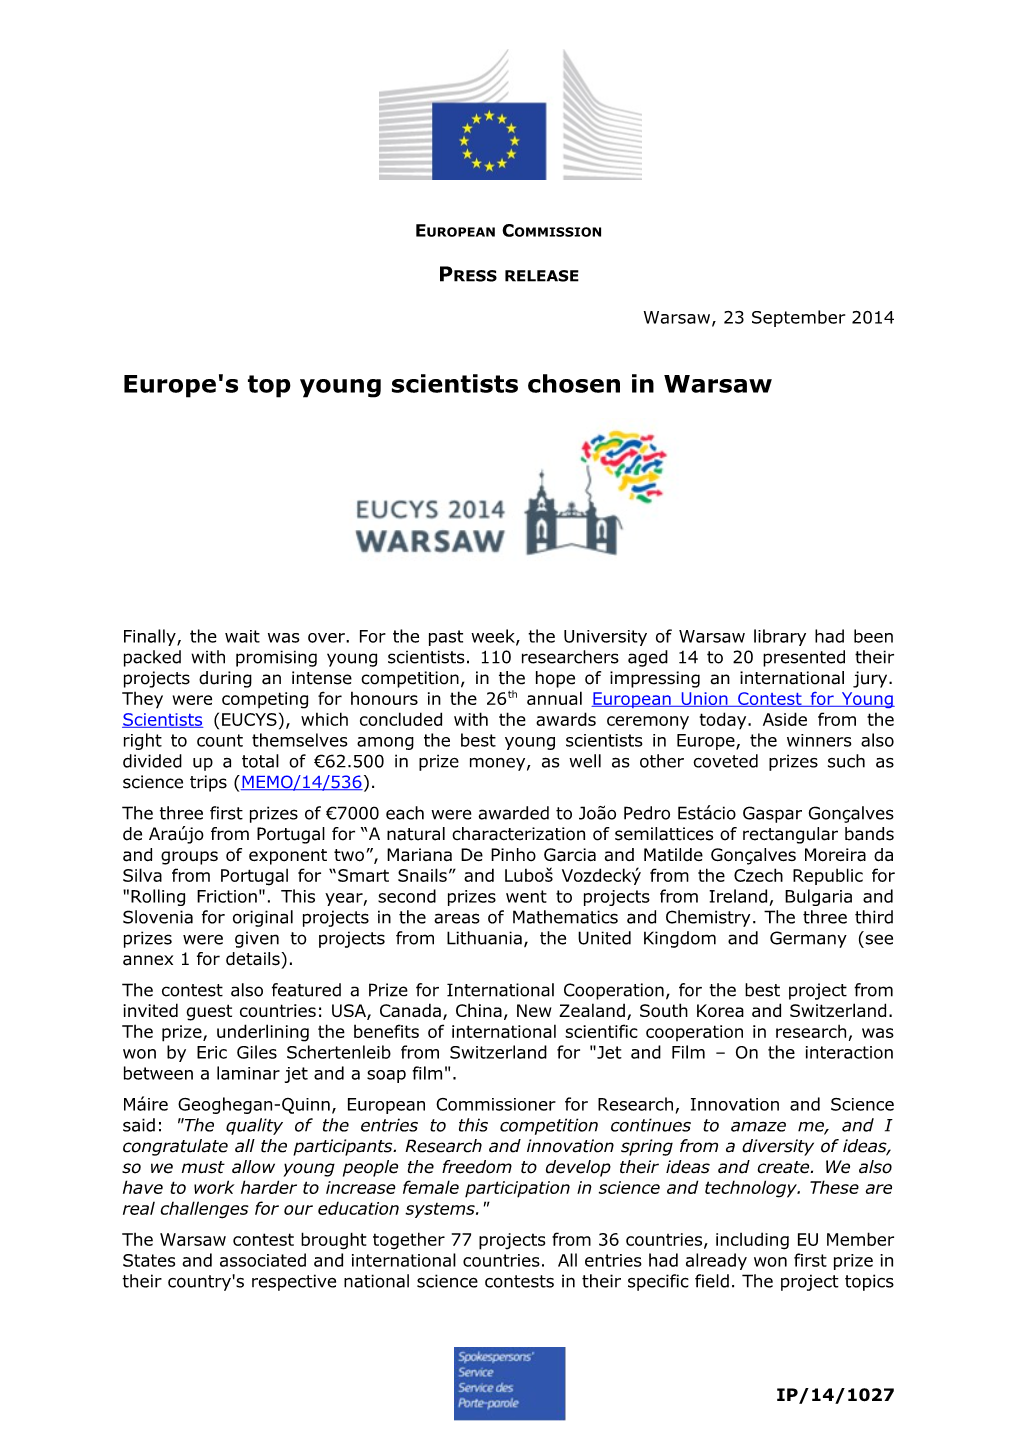 Europe's Top Young Scientists Chosen in Warsaw